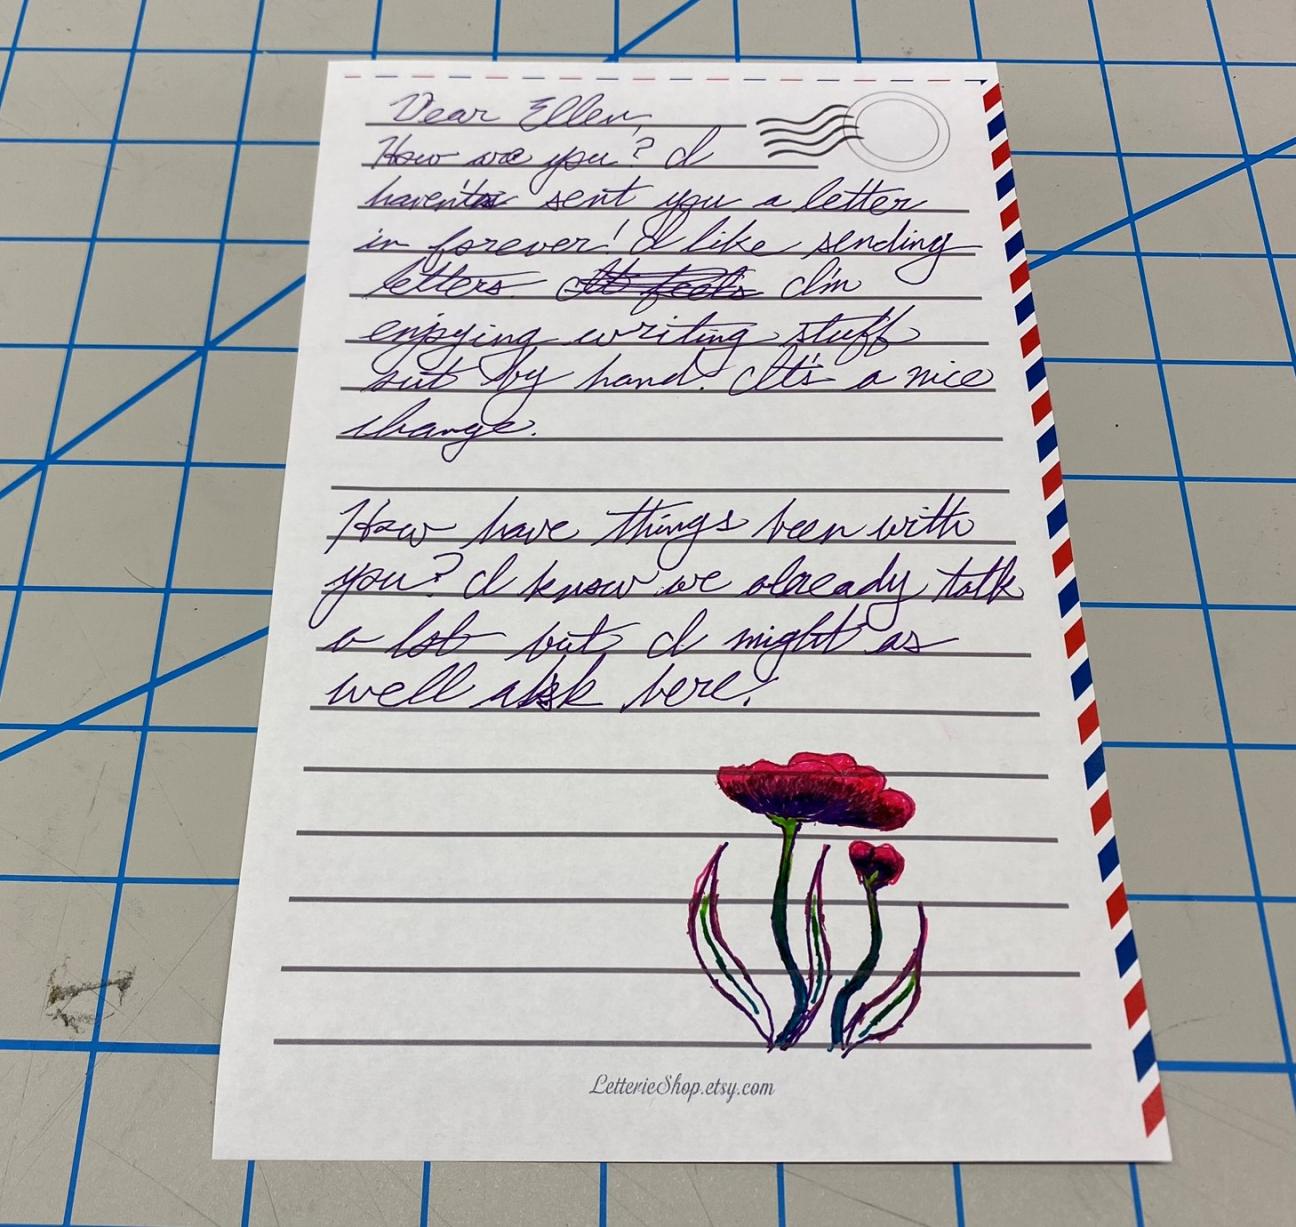 A letter written with gel pens on printed stationery, with a drawing of flowers on the bottom of the page.